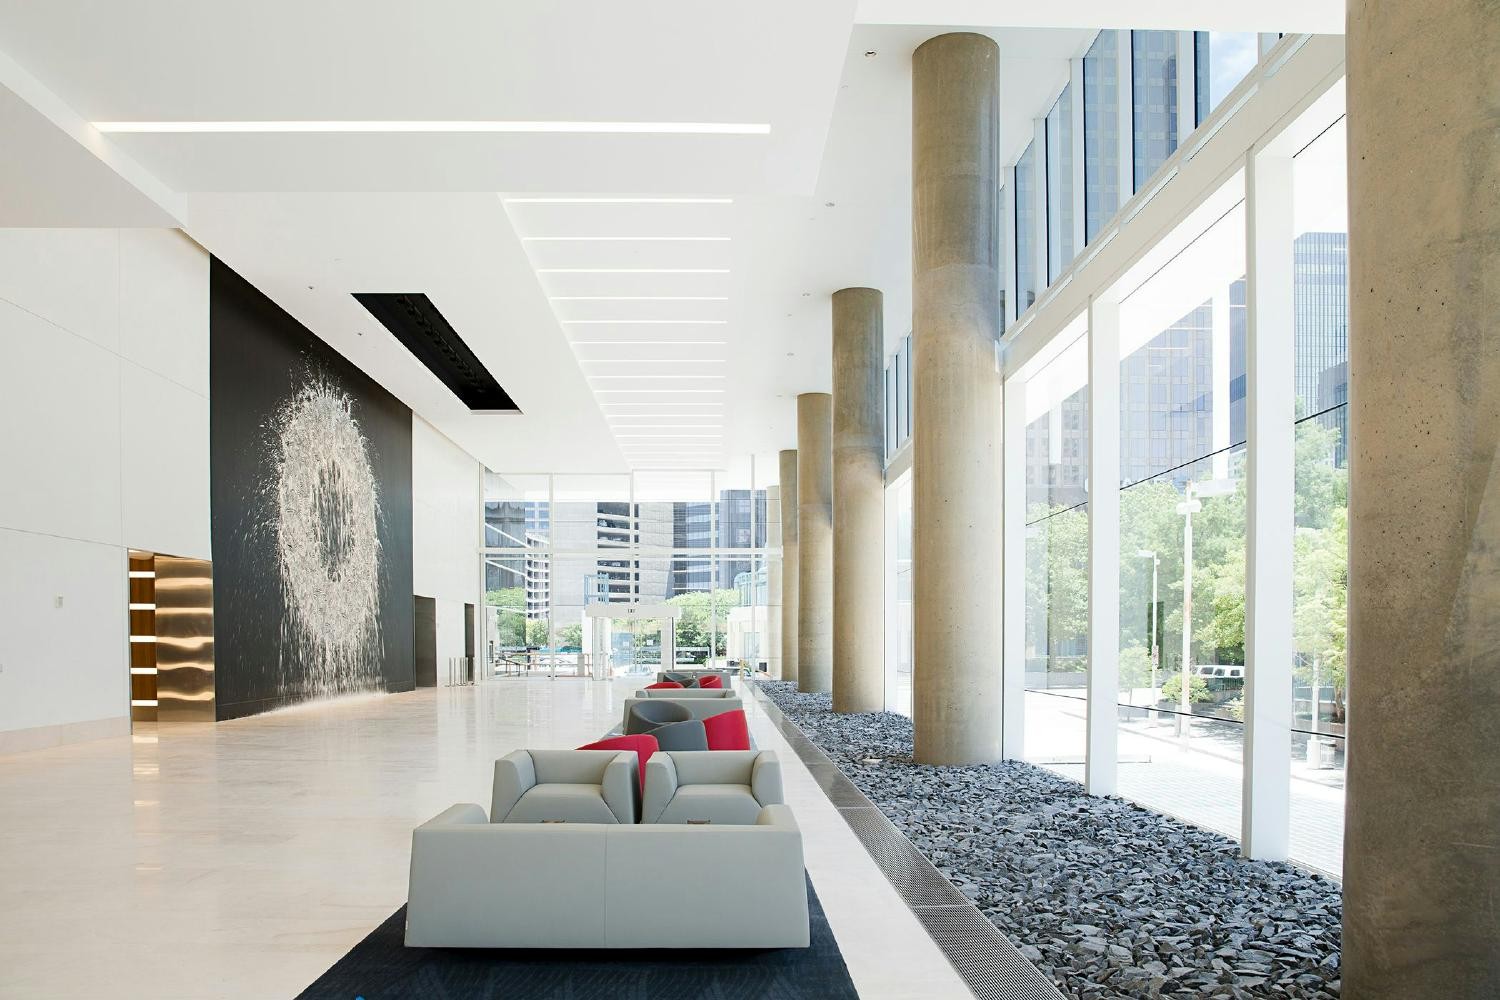 Lobby at KPMG Plaza at HALL Arts where HALL Group is located